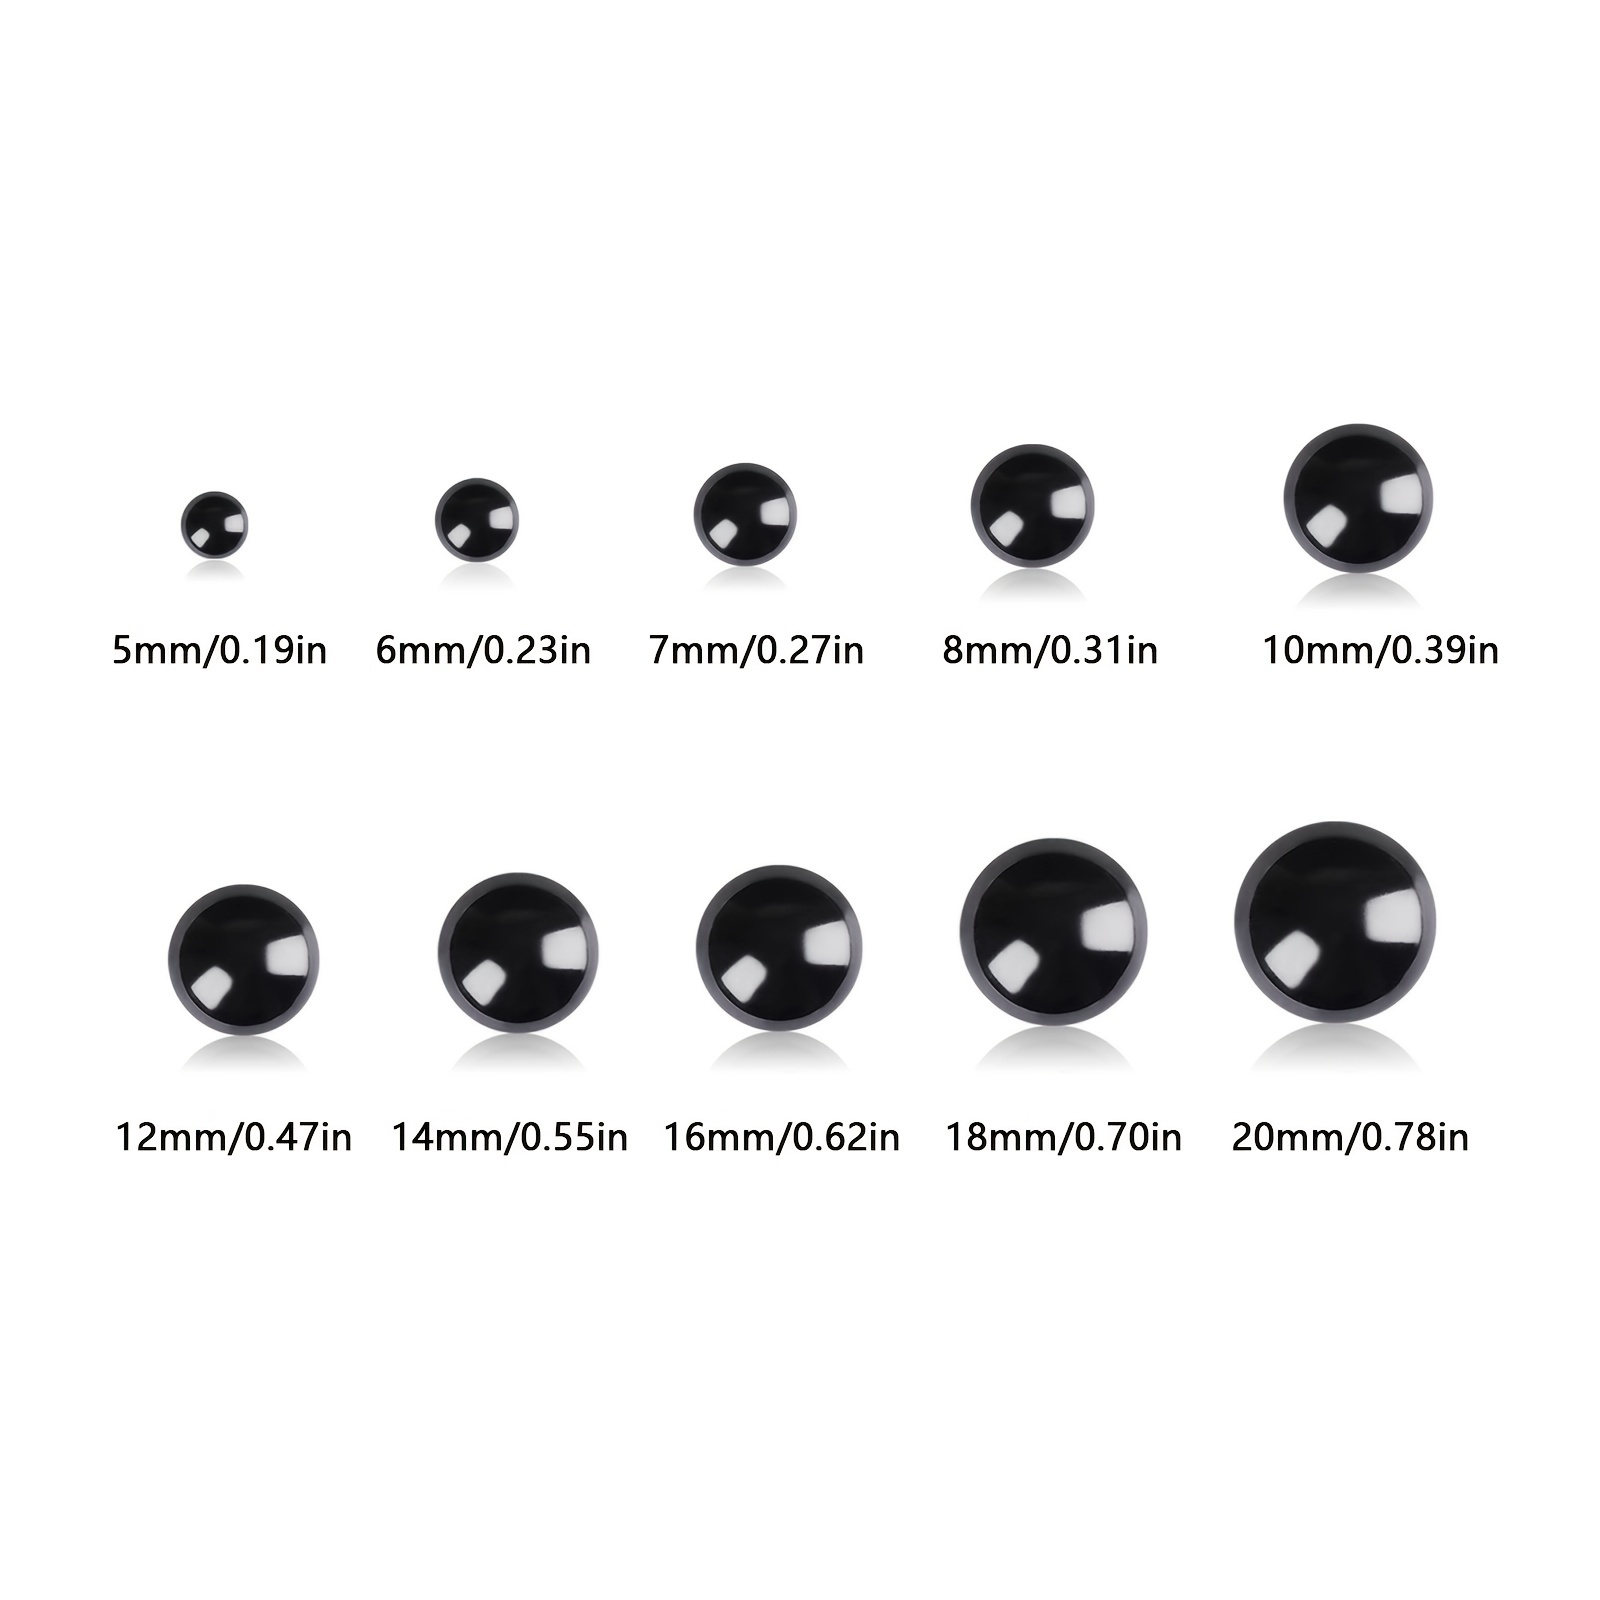 566pcs Safety Eyes And Noses For Amigurumi, Stuffed Crochet Eyes With  Washers, Craft Doll Eyes And Nose For Teddy Bear, Crochet Doll, Stuffed  Doll And